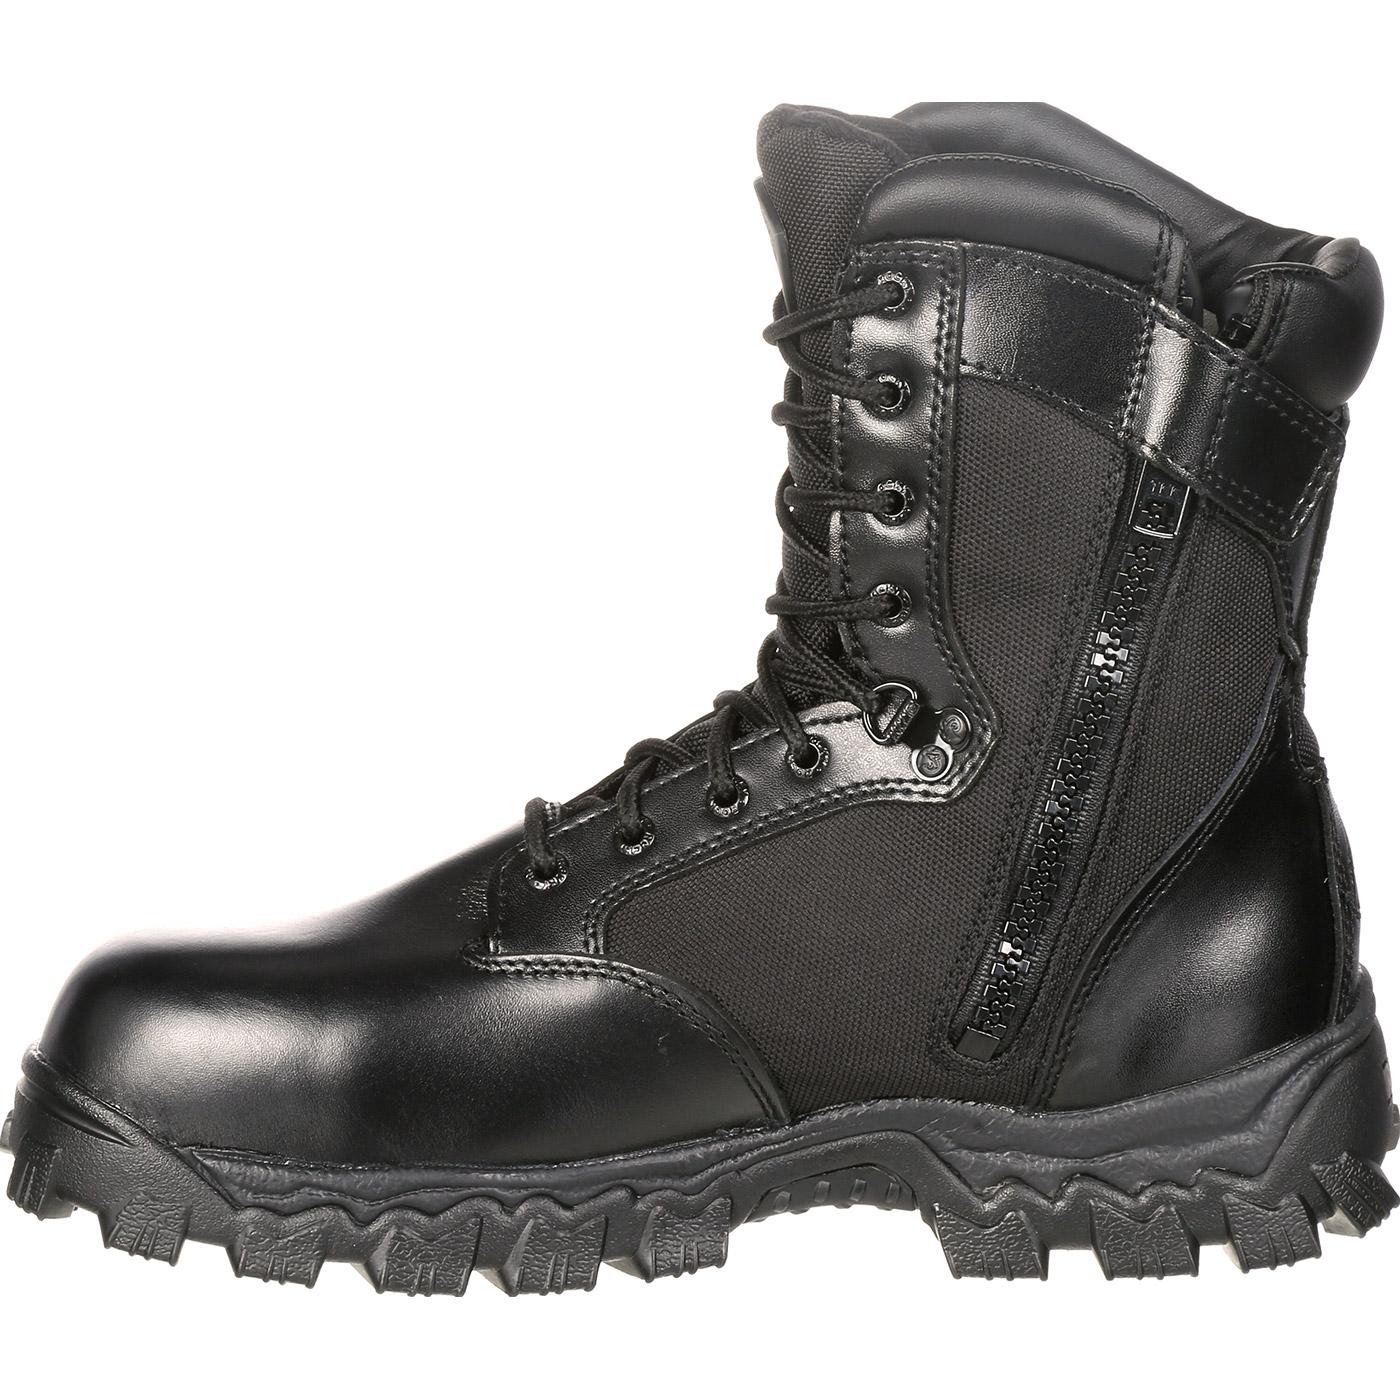 Rocky Alpha Force Waterproof 400G Insulated Public Service Boot Size 5.5(W) - image 5 of 7